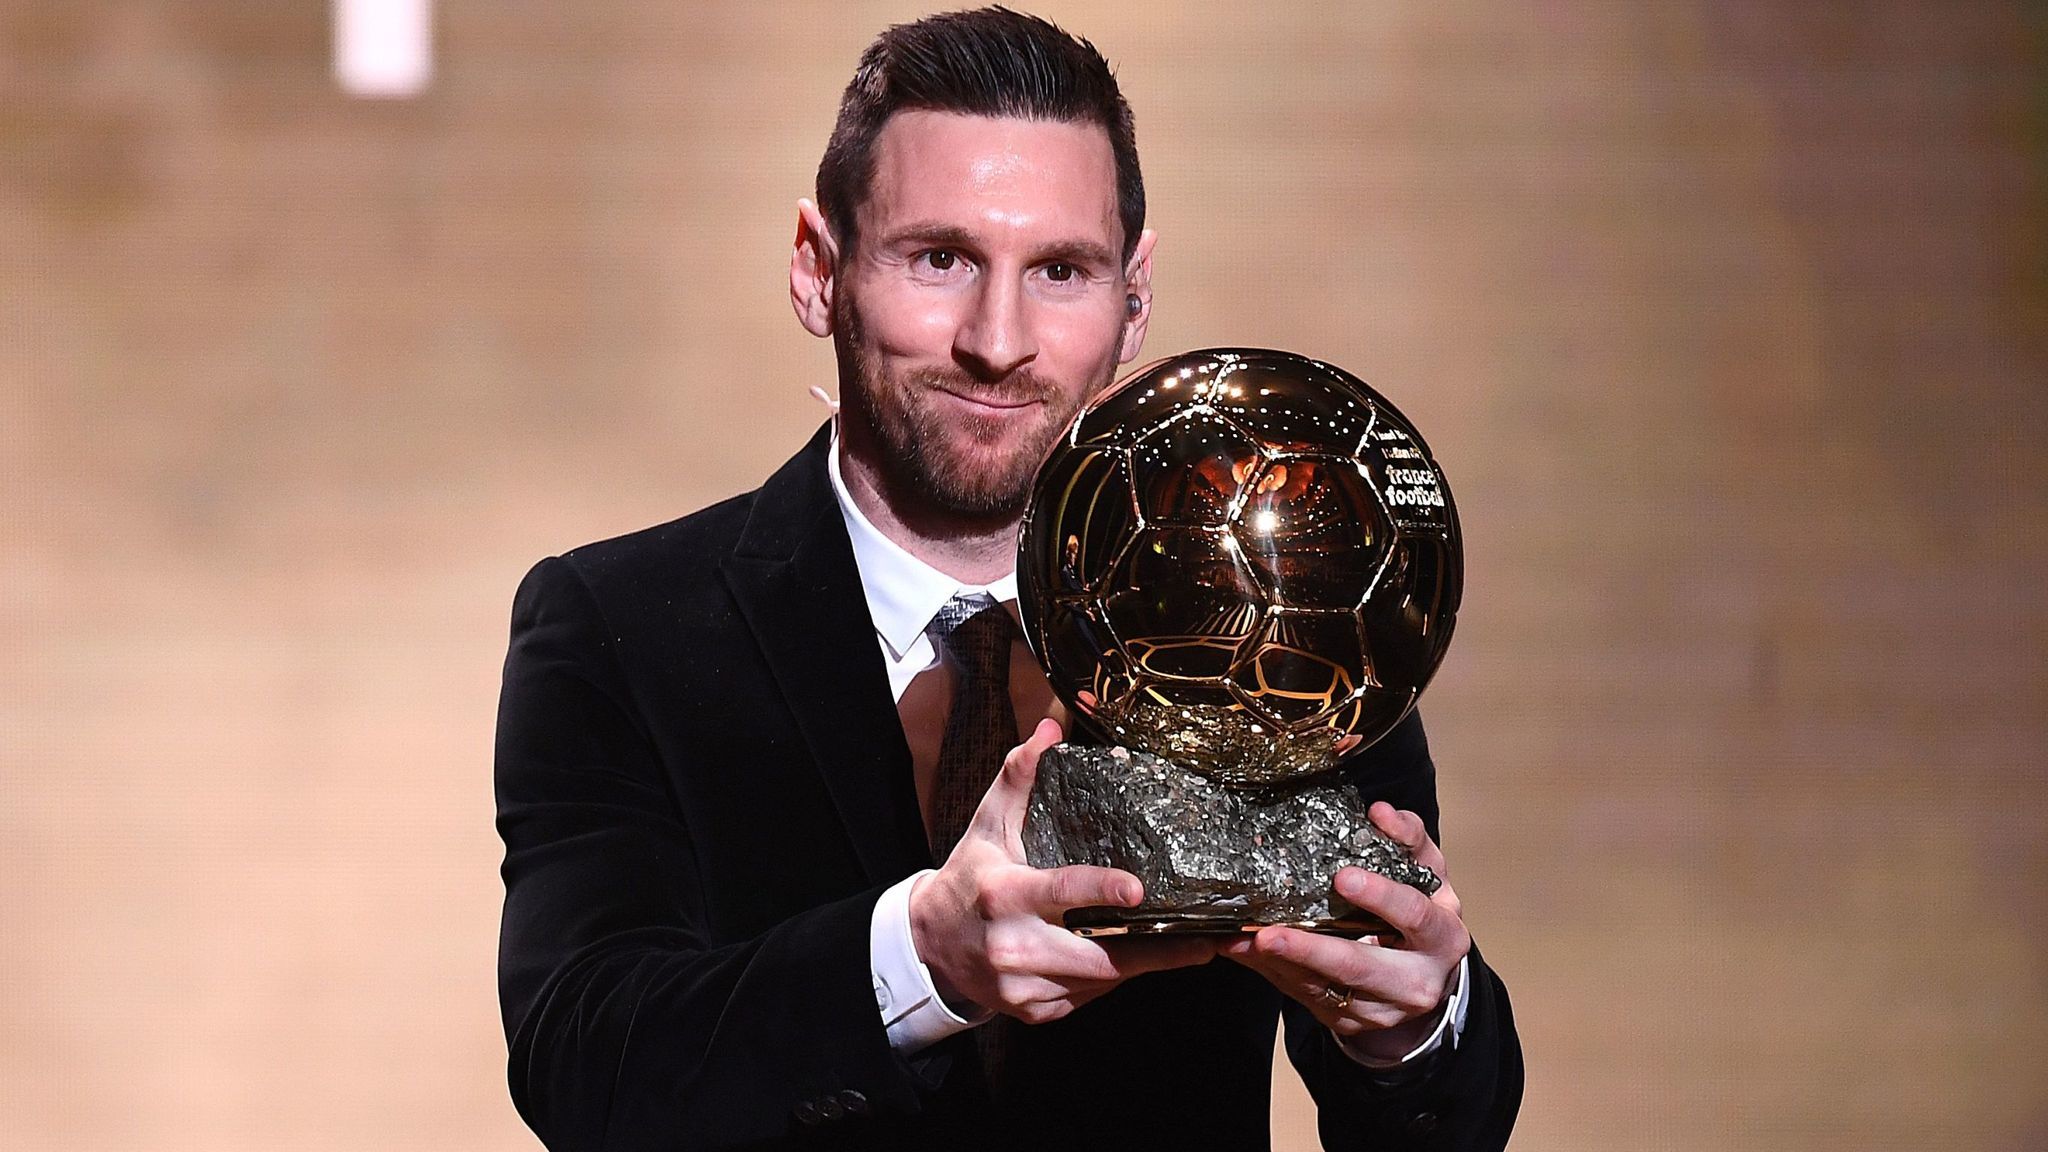 Messi tops Goal's list of contenders for the Ballon d'Or